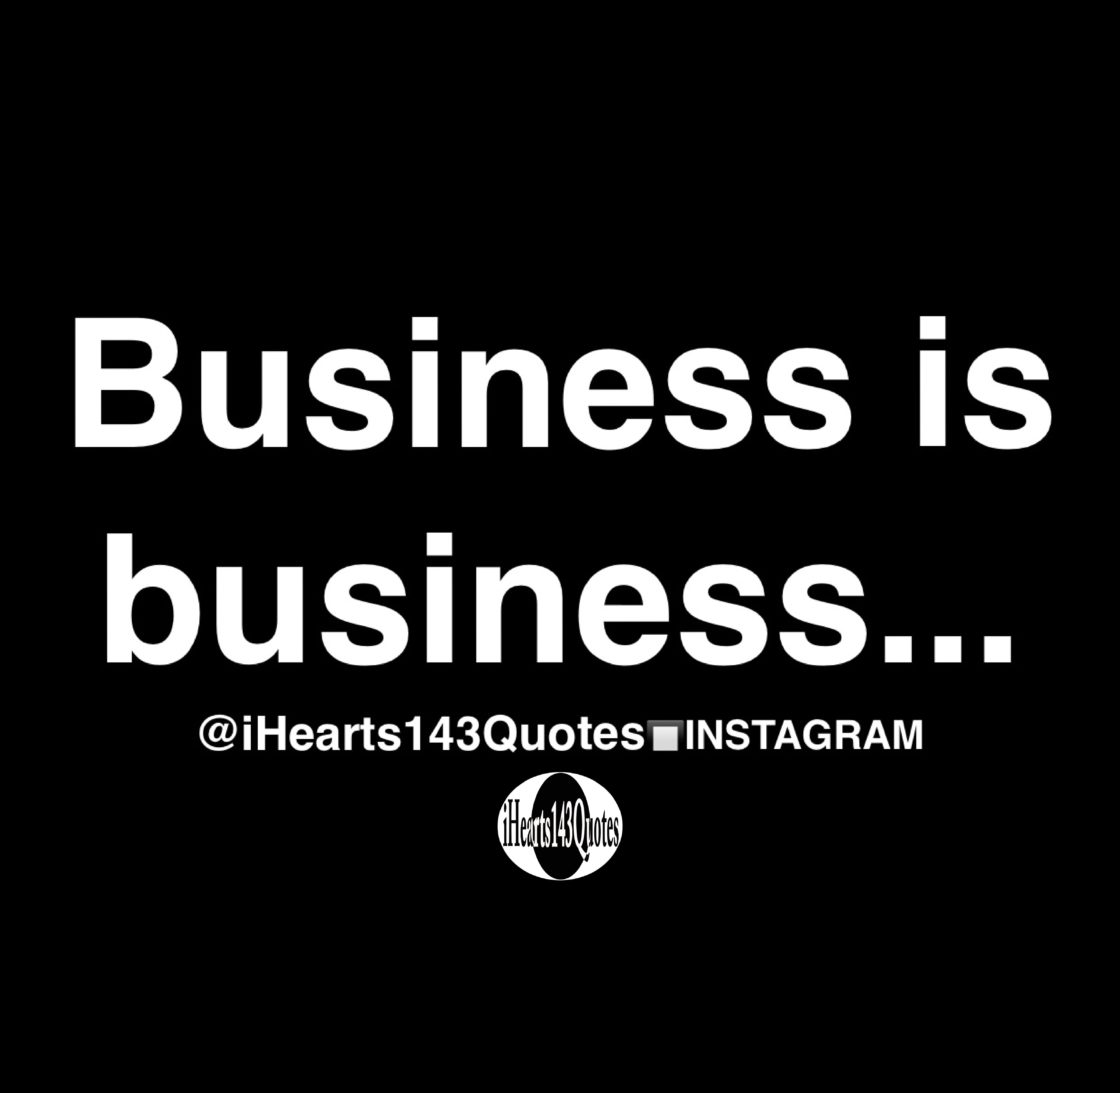 Business is business - Quotes - iHearts143Quotes